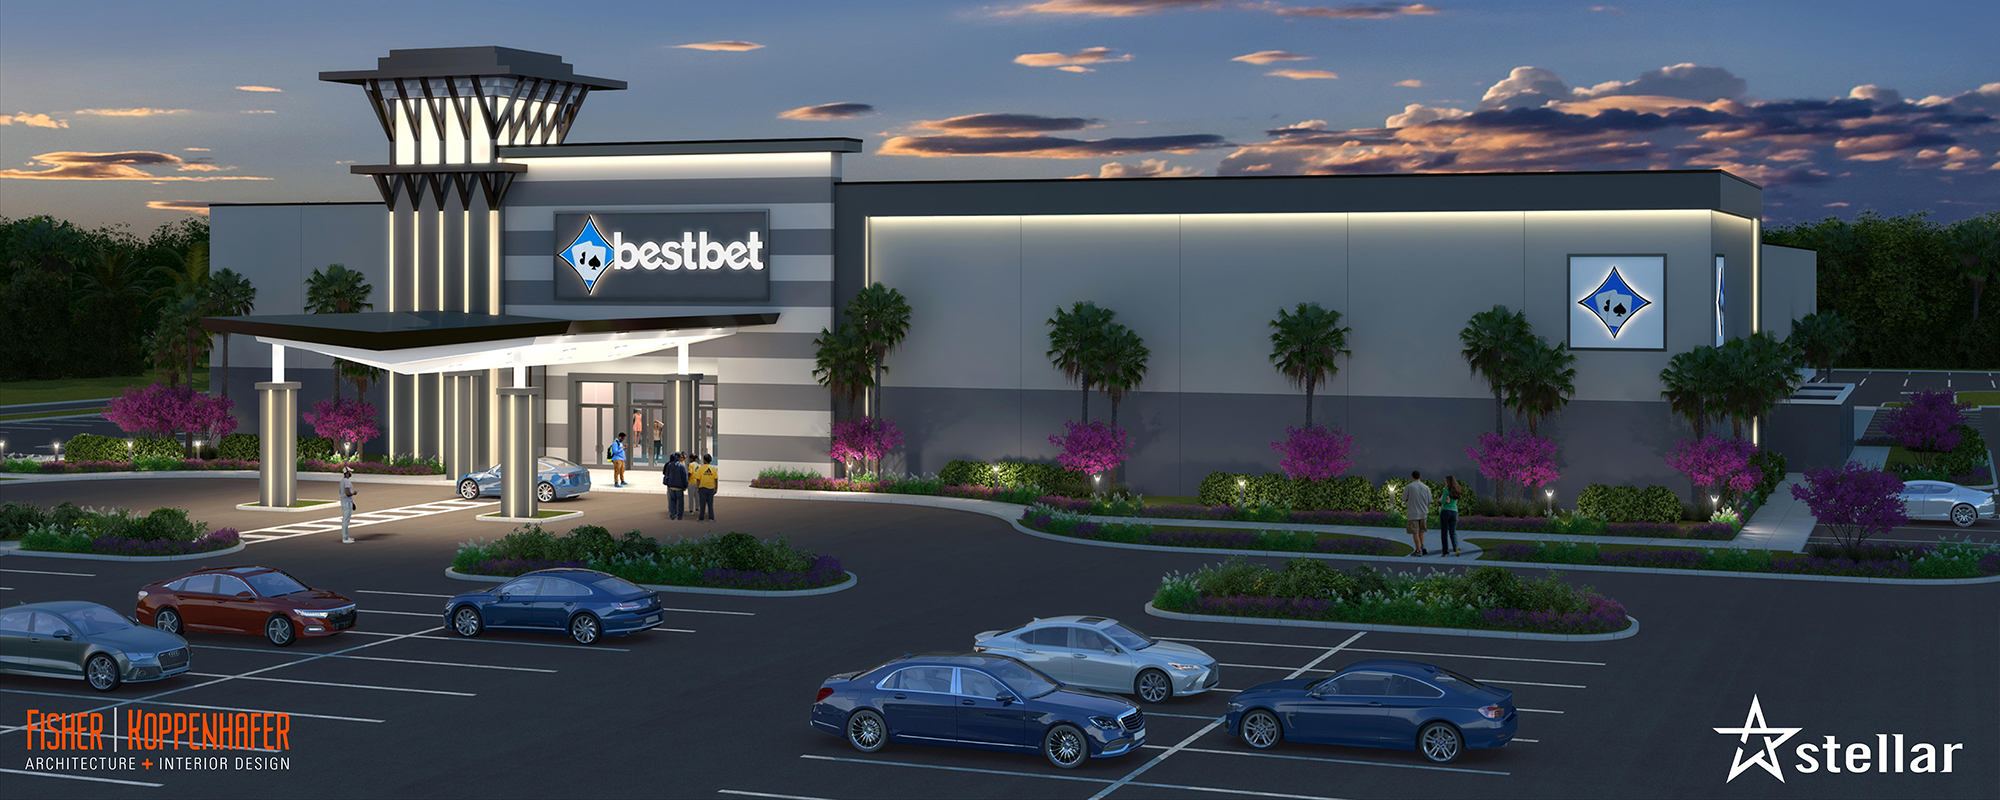 bestbet St. Augustine is planned at 800 Marketplace Drive near Interstate 95 and Florida 207 in St. Johns County.